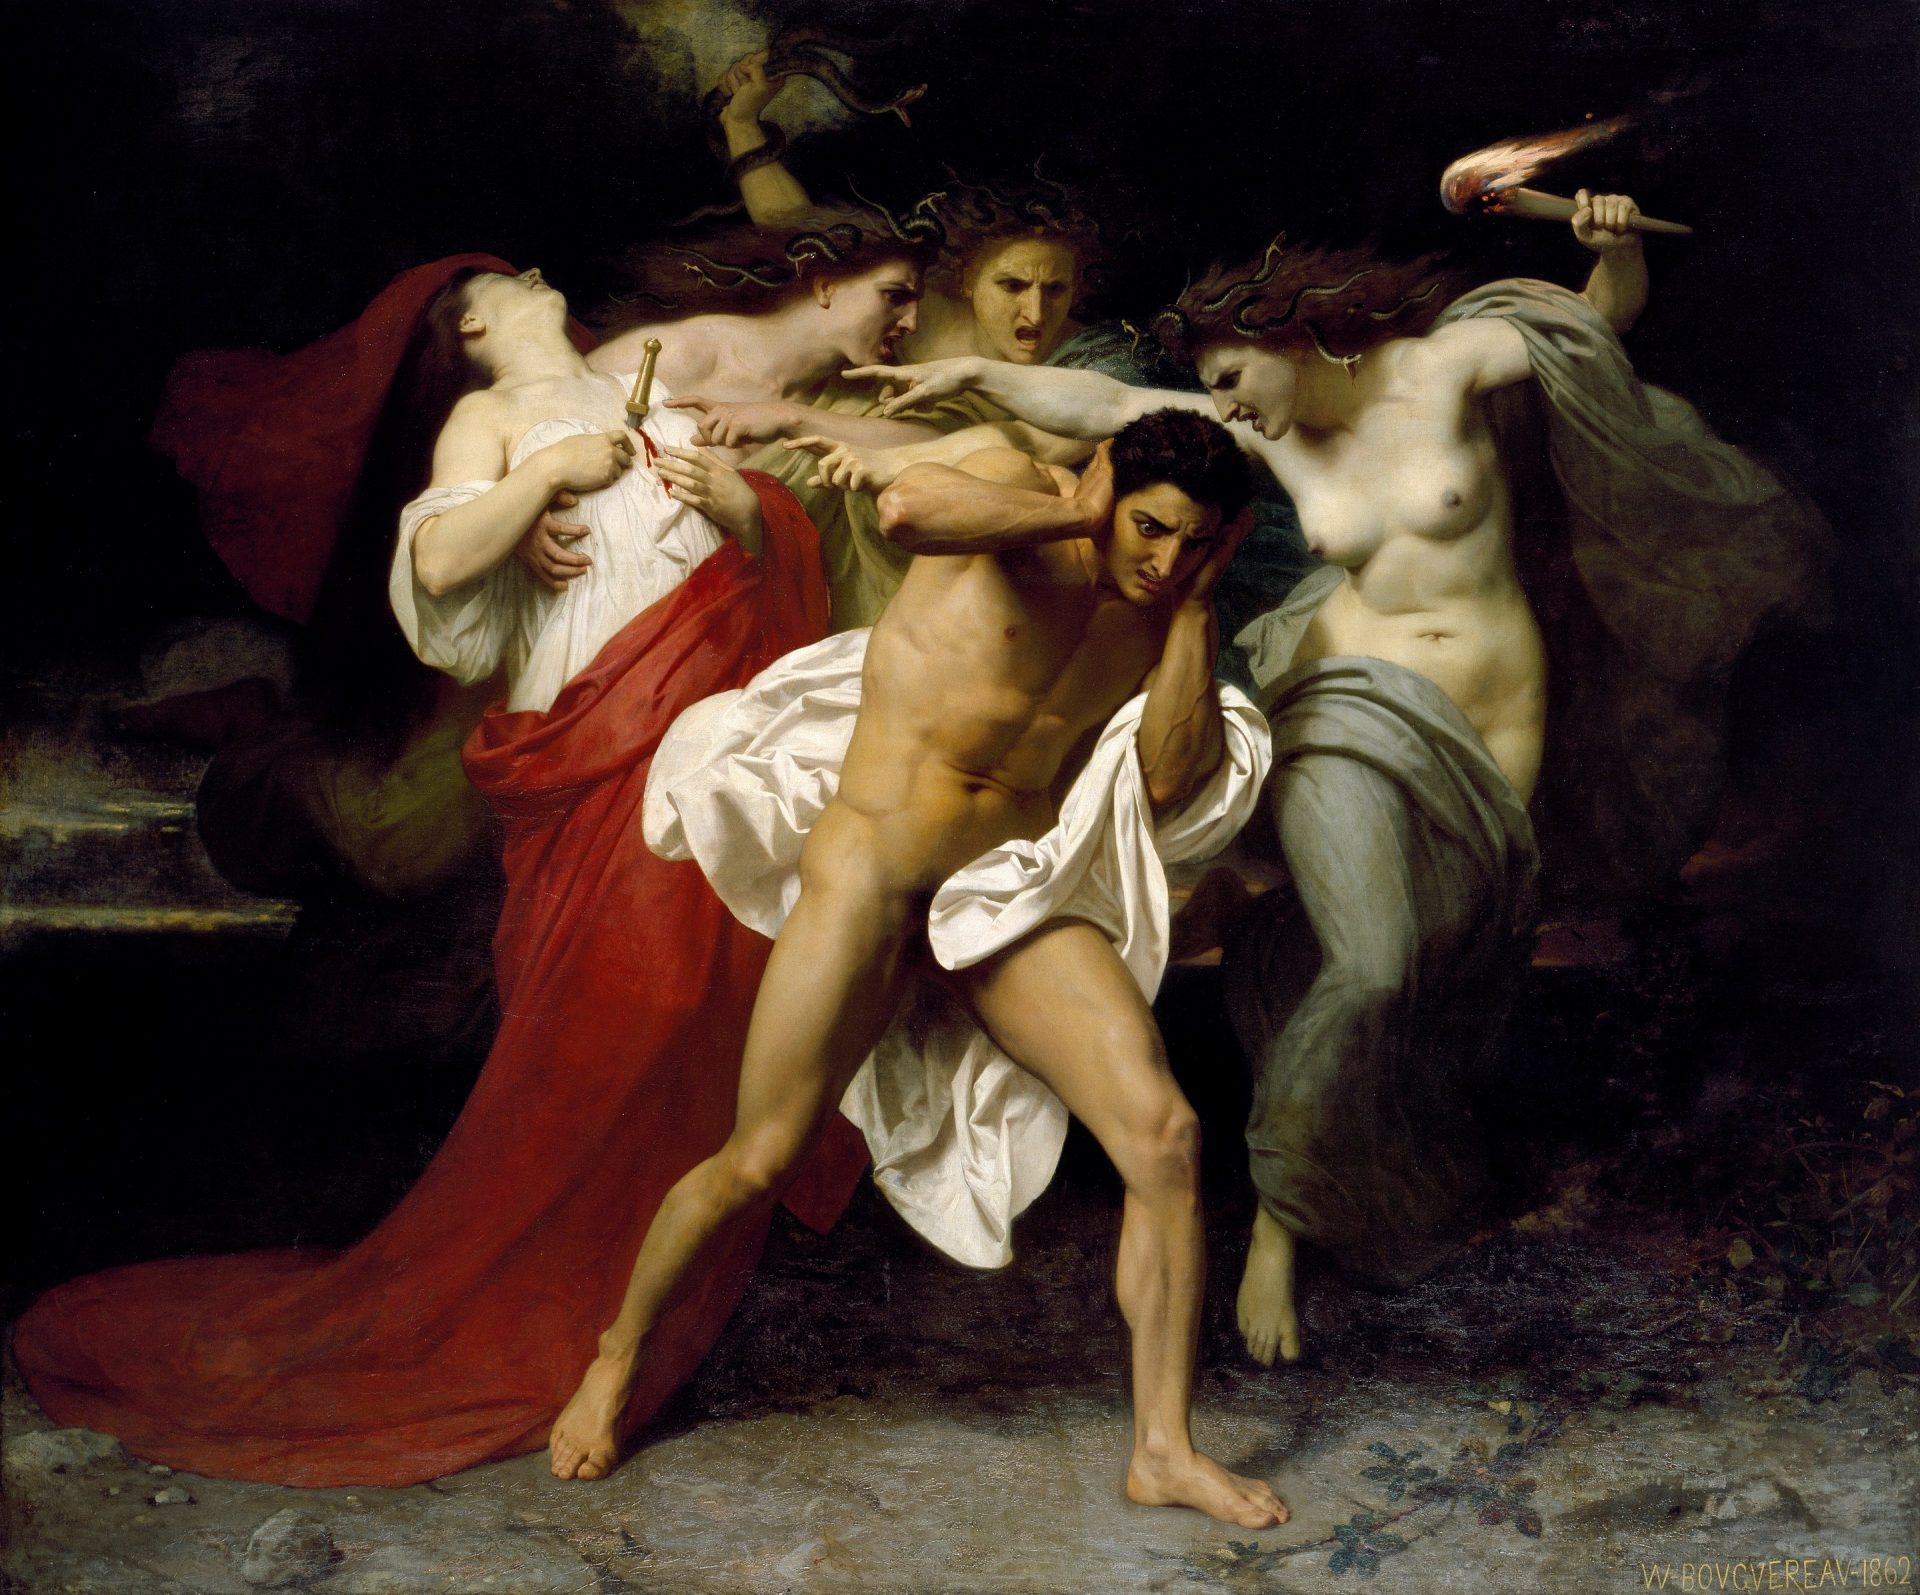 A painting of three furies attacking a human couple